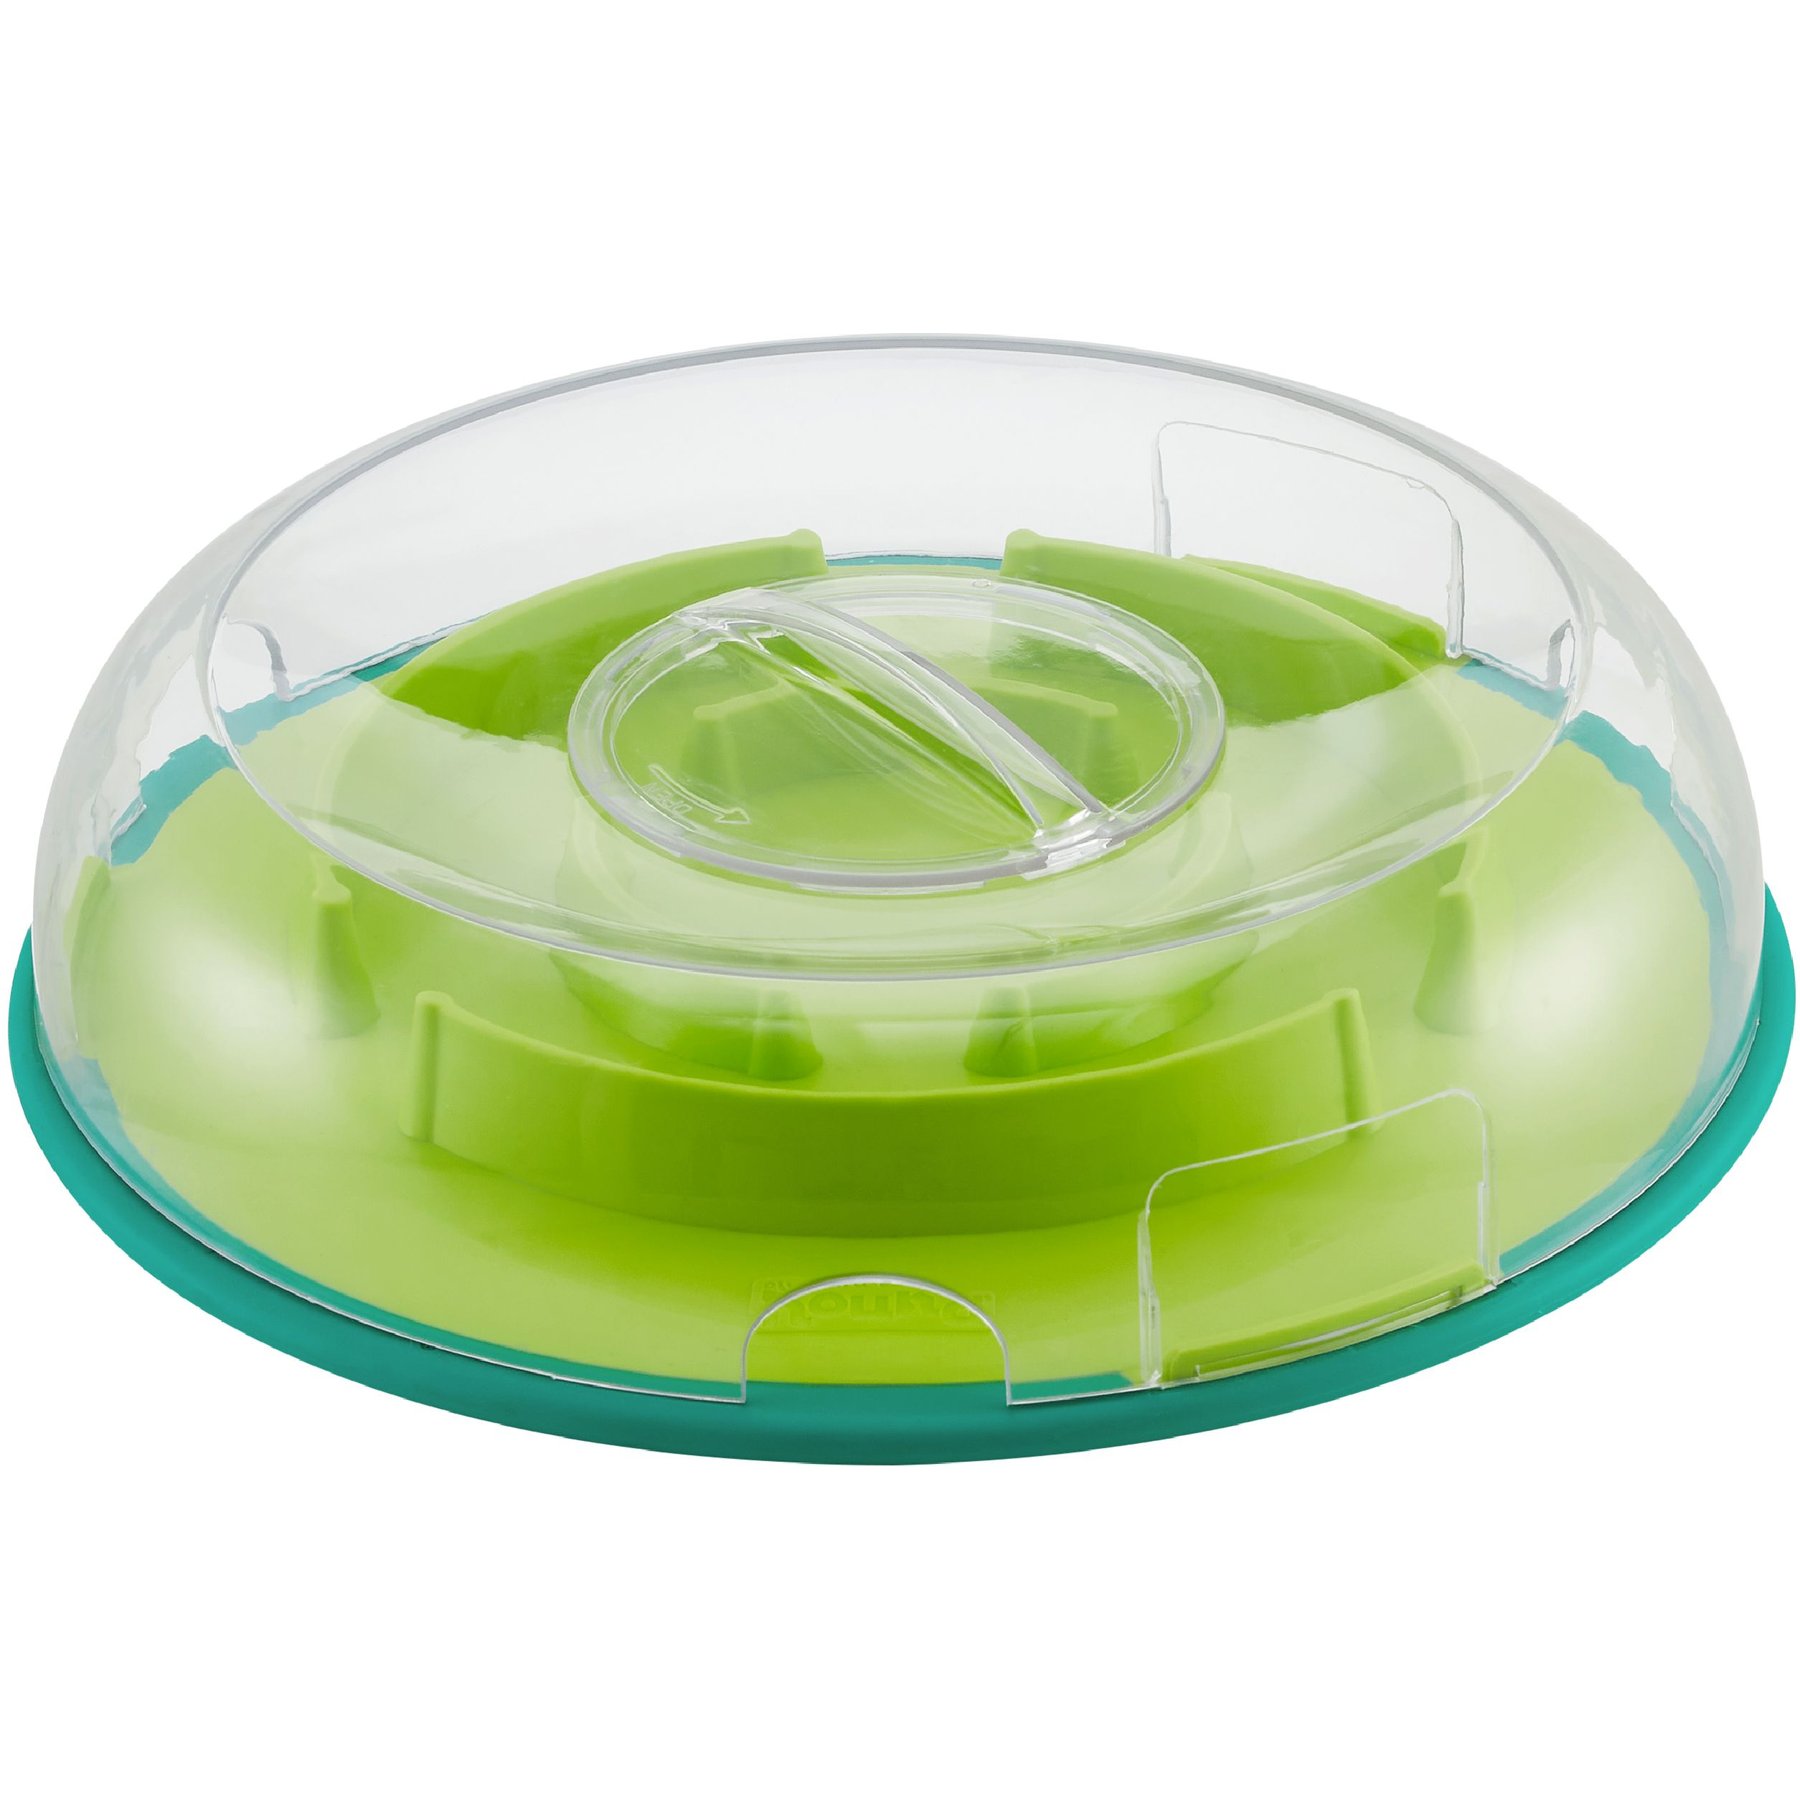 Slow Feed Dog Bowl for Raised Pet Feeders - 4-Cup Star Maze Bowl for Feeder Holes